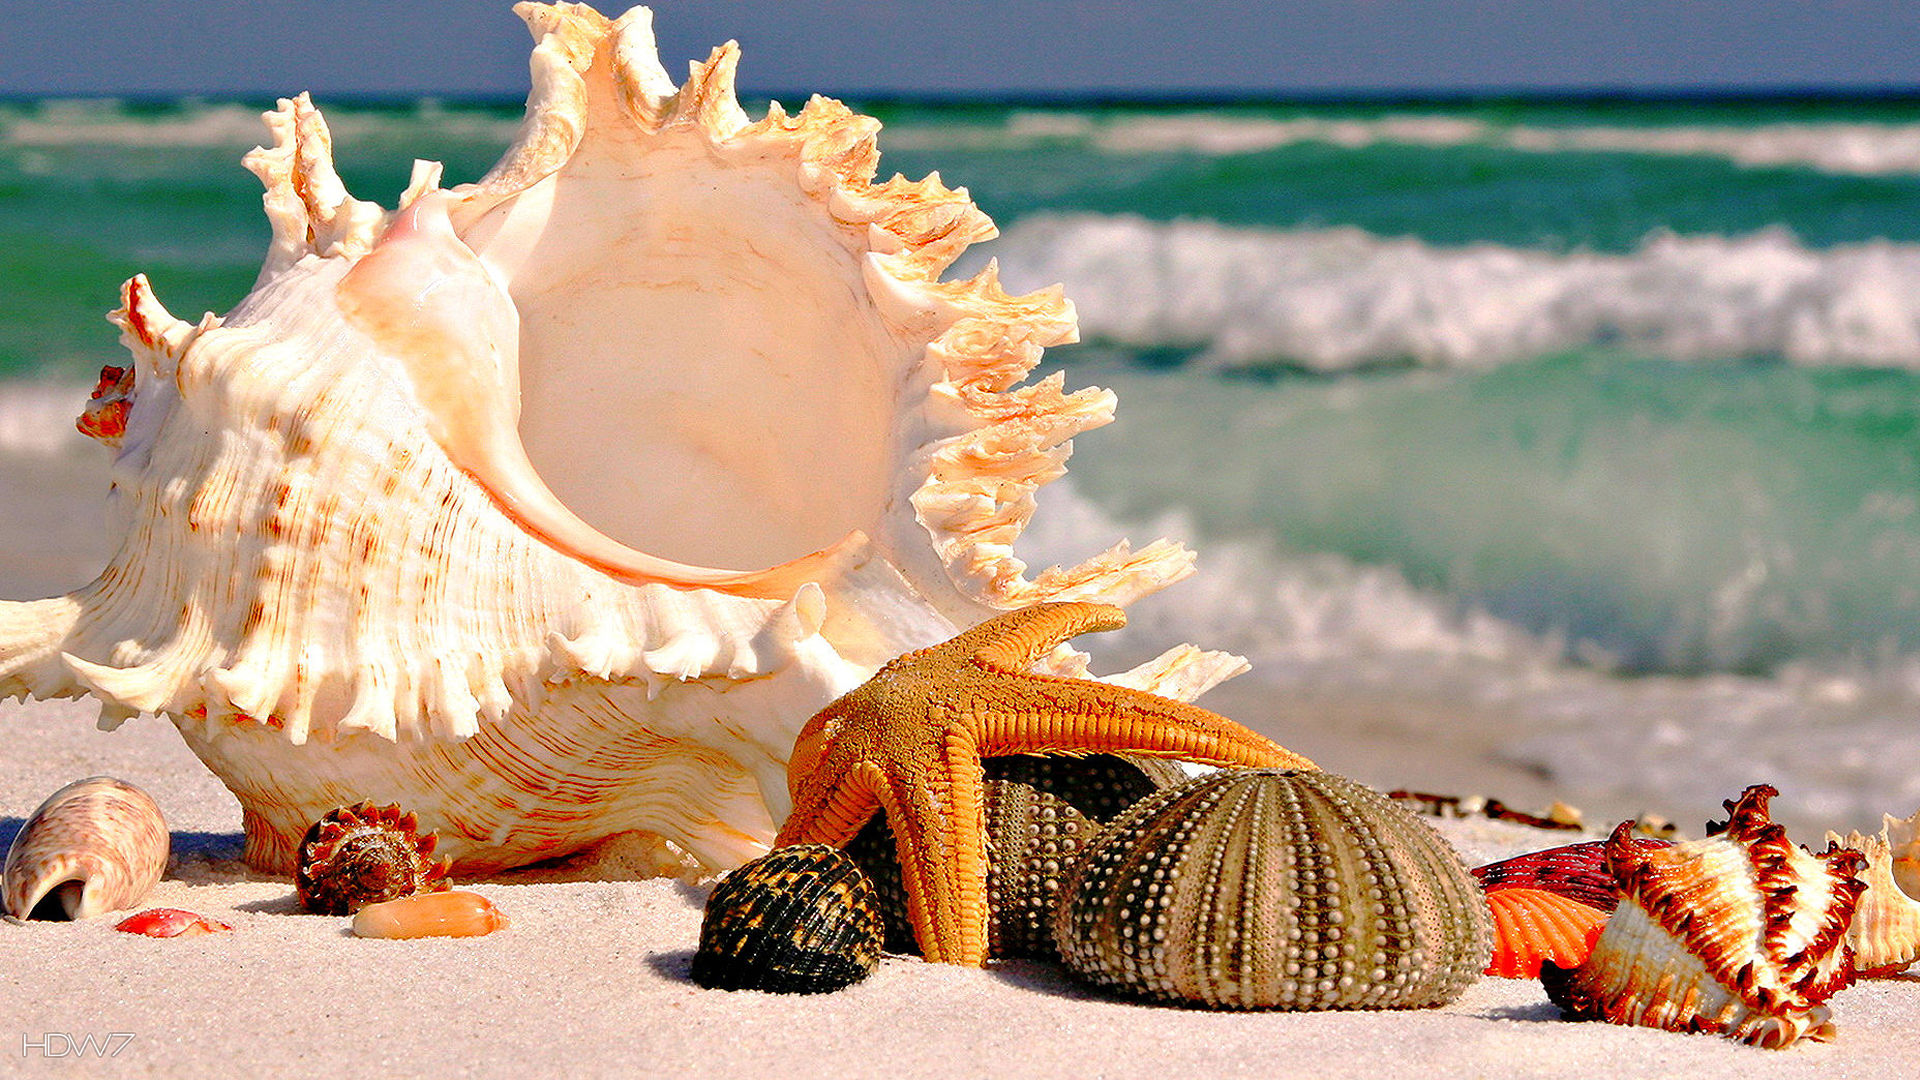 shells on the shore 1920x1080 | HD wallpaper gallery #25